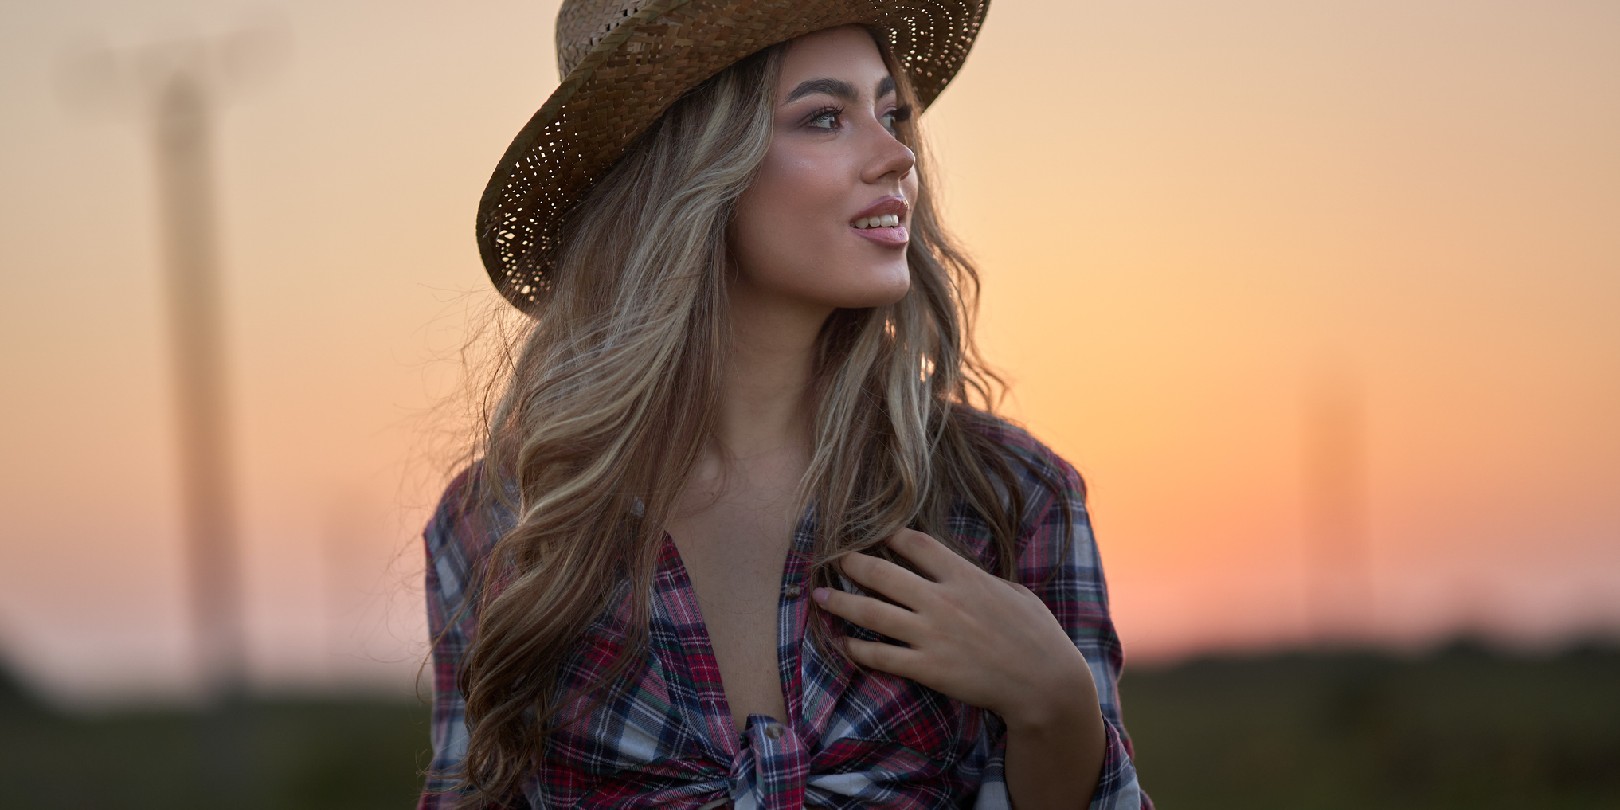 Beautiful cowgirl in hat, plaid shirt and short jeans at sunset in a countryside field